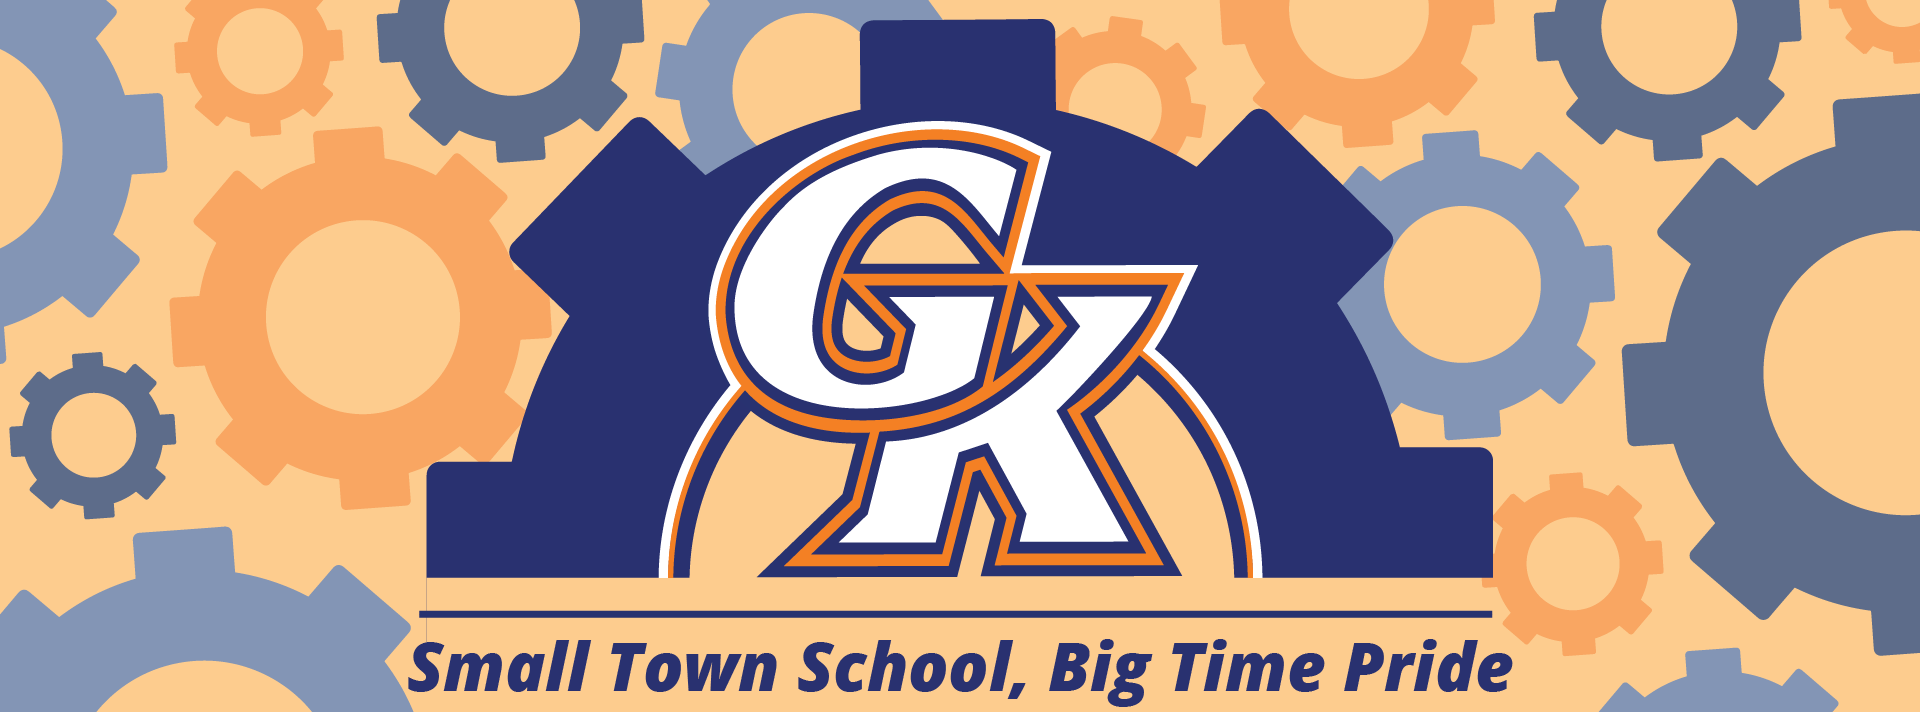 image of cogs with text, "small town school big time pride"